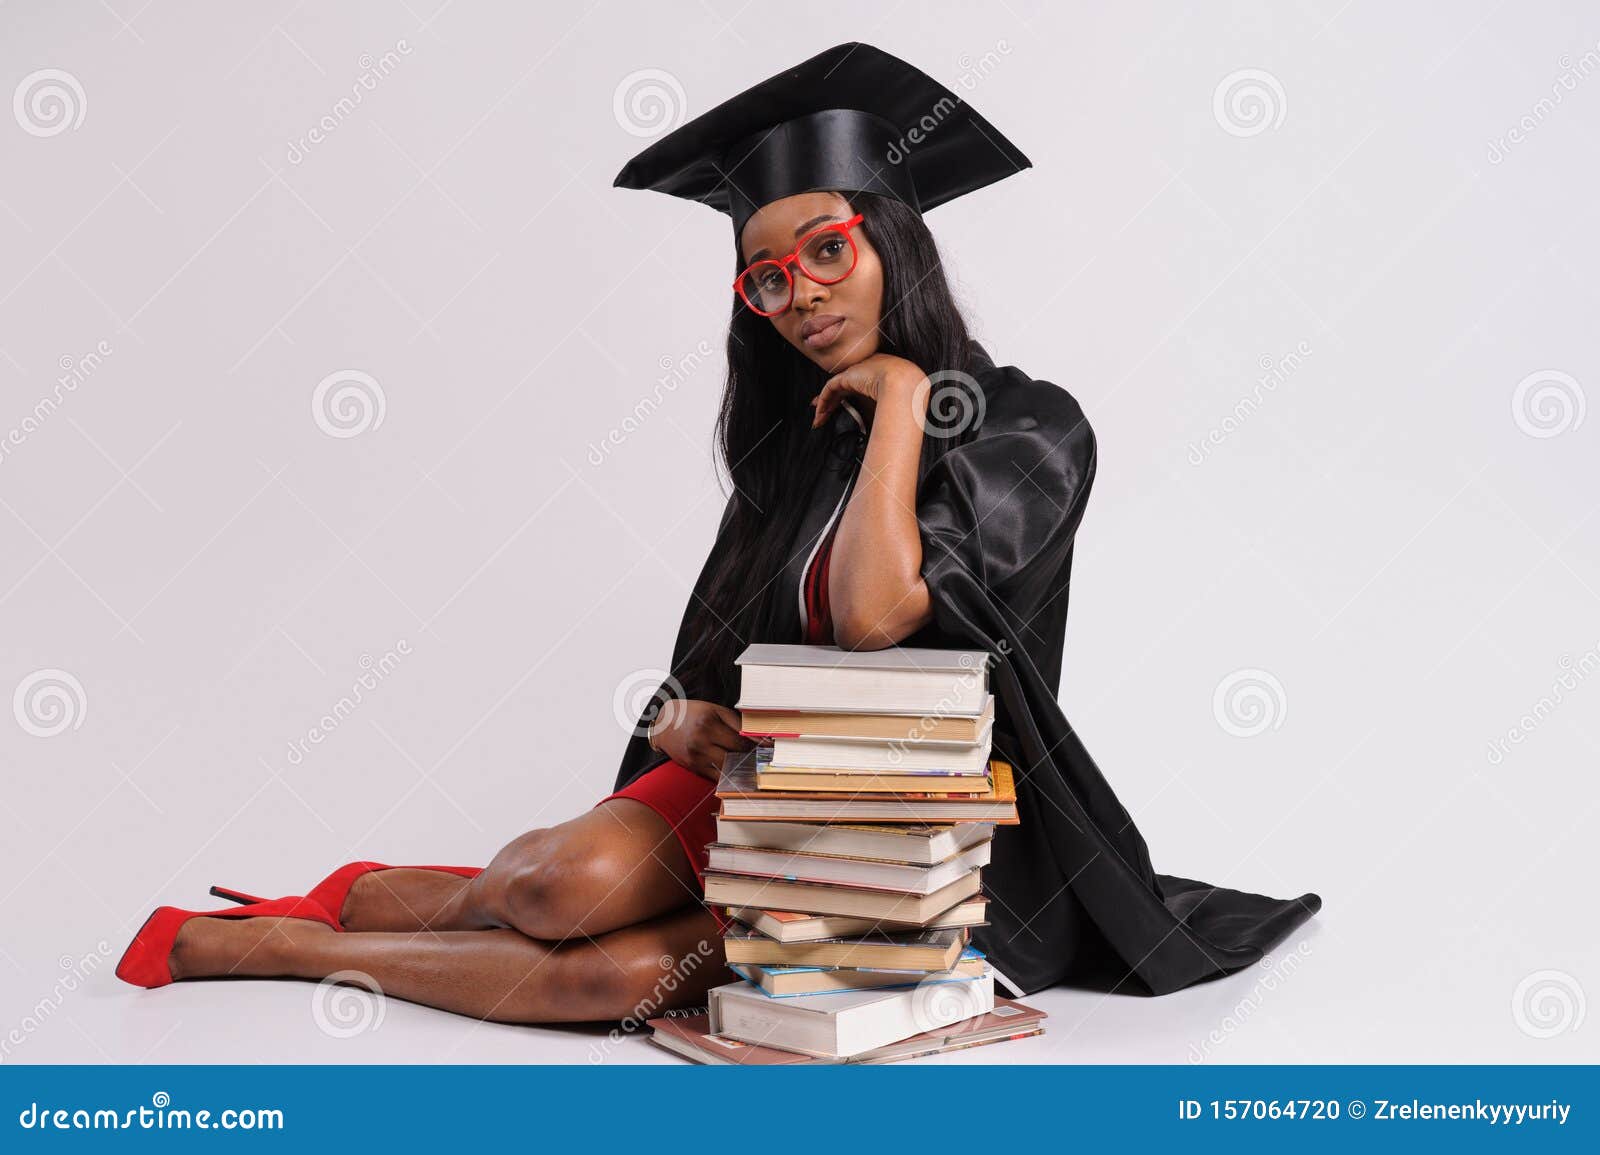 Cap + Gown Family Pictures for your Graduate — Studio B Portraits - Luxury  Photography Studio